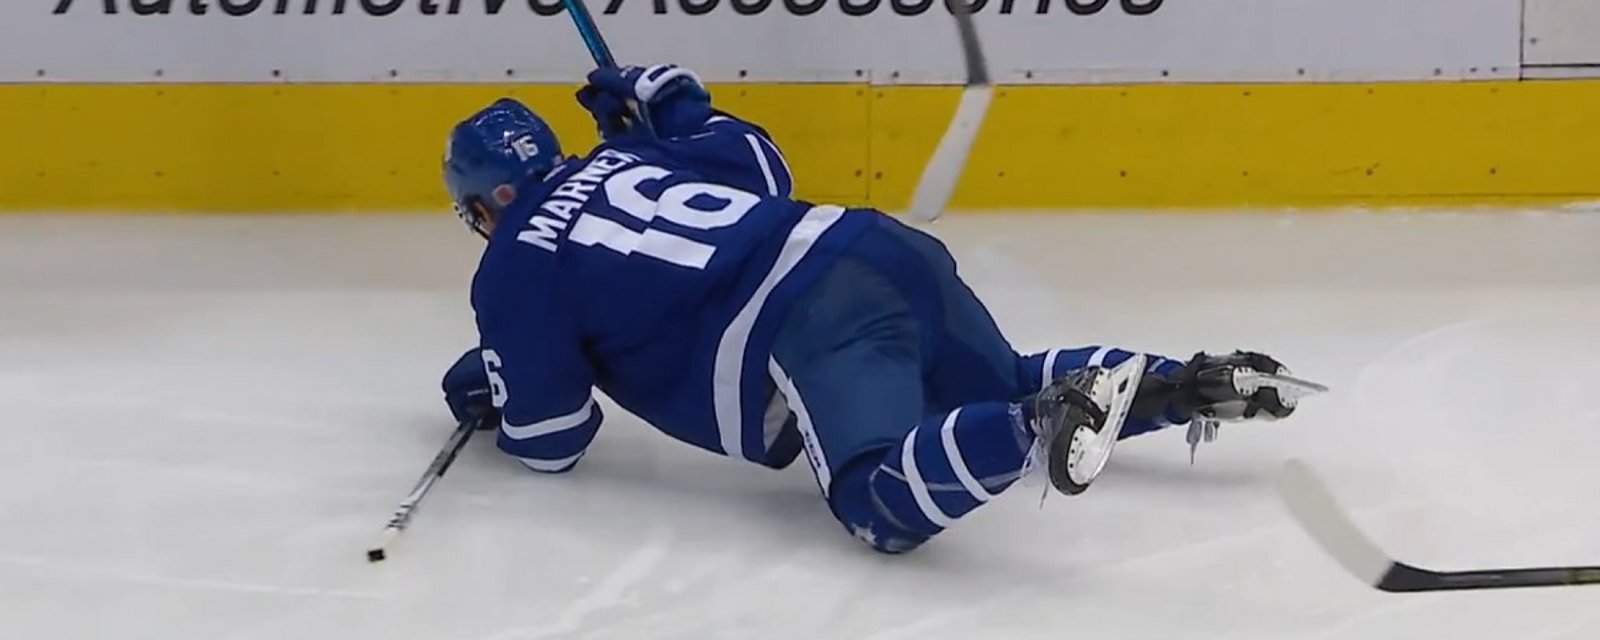 Mitch Marner struggles to get to the bench, appears to have suffered a knee injury. 